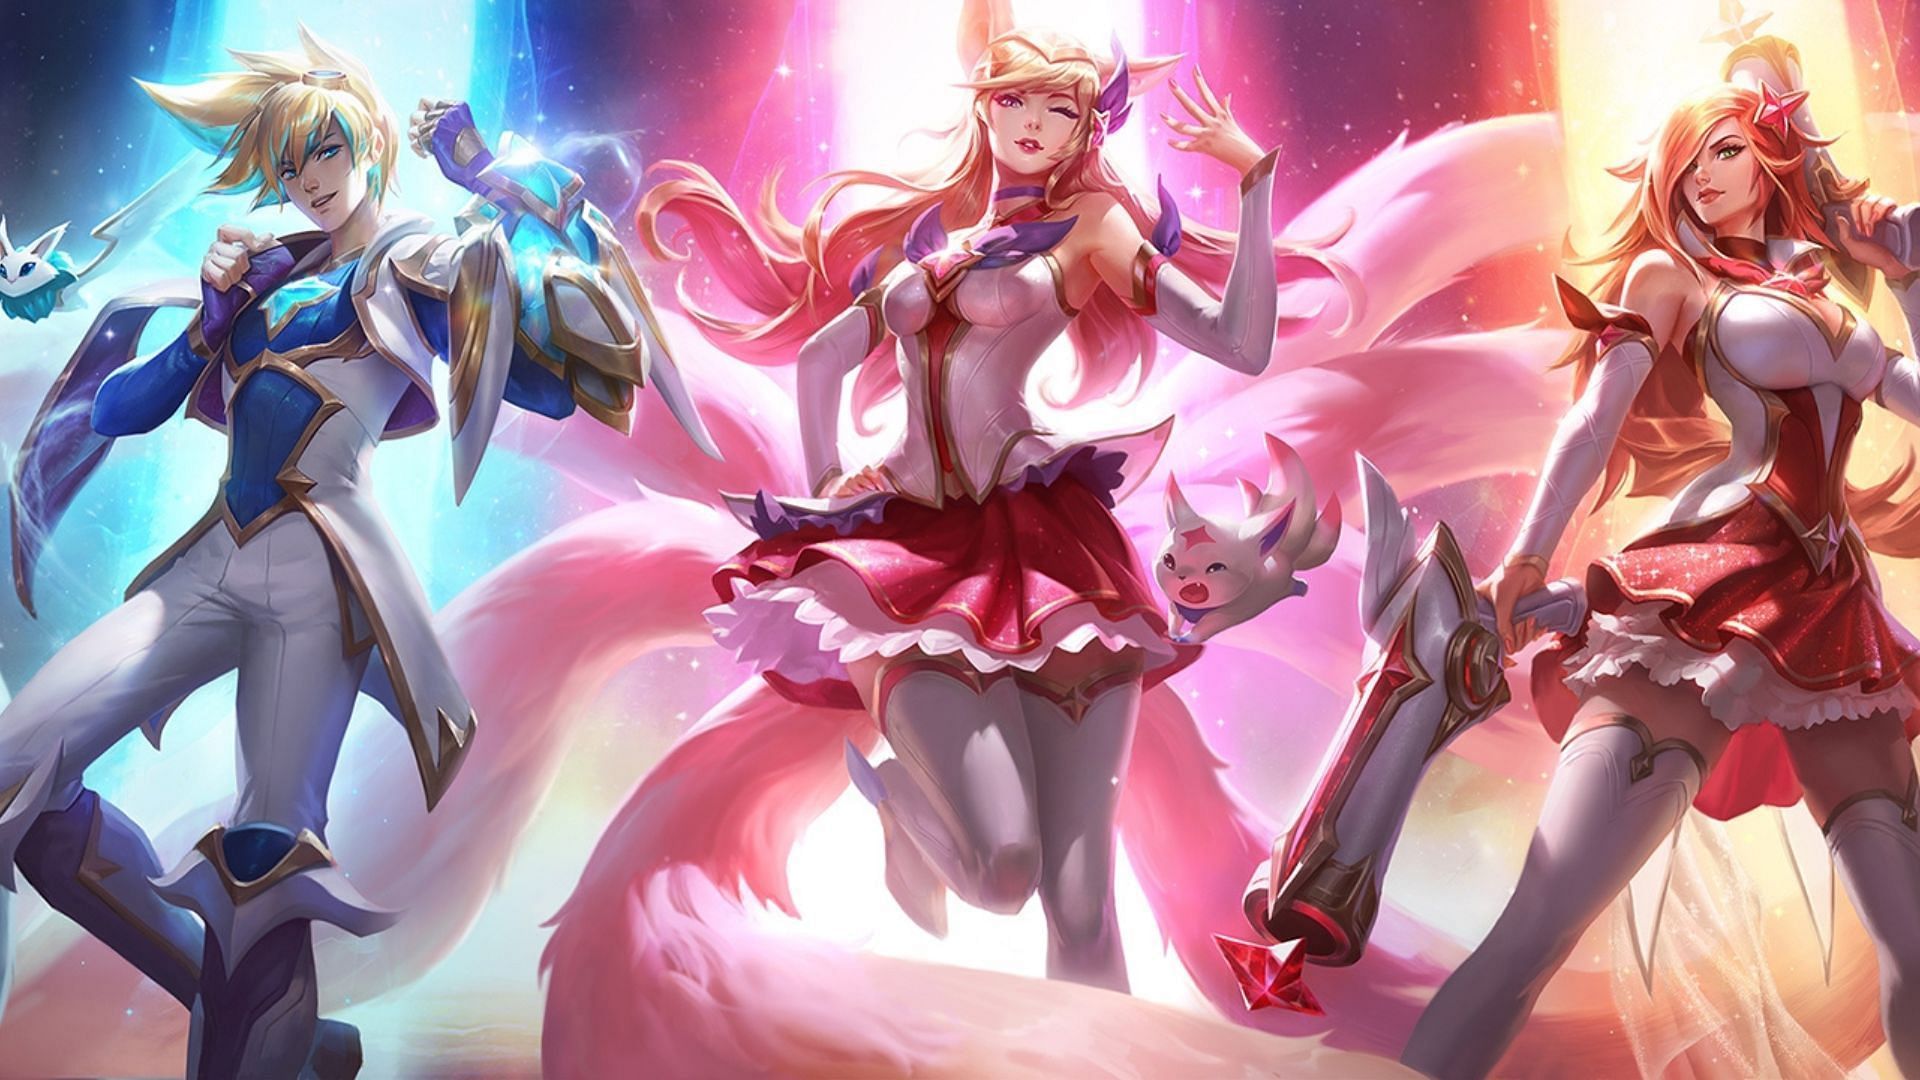 Valorant Episode 9 Act 1 bundle is inspired by the Star Guardian universe (Image via Riot Games)